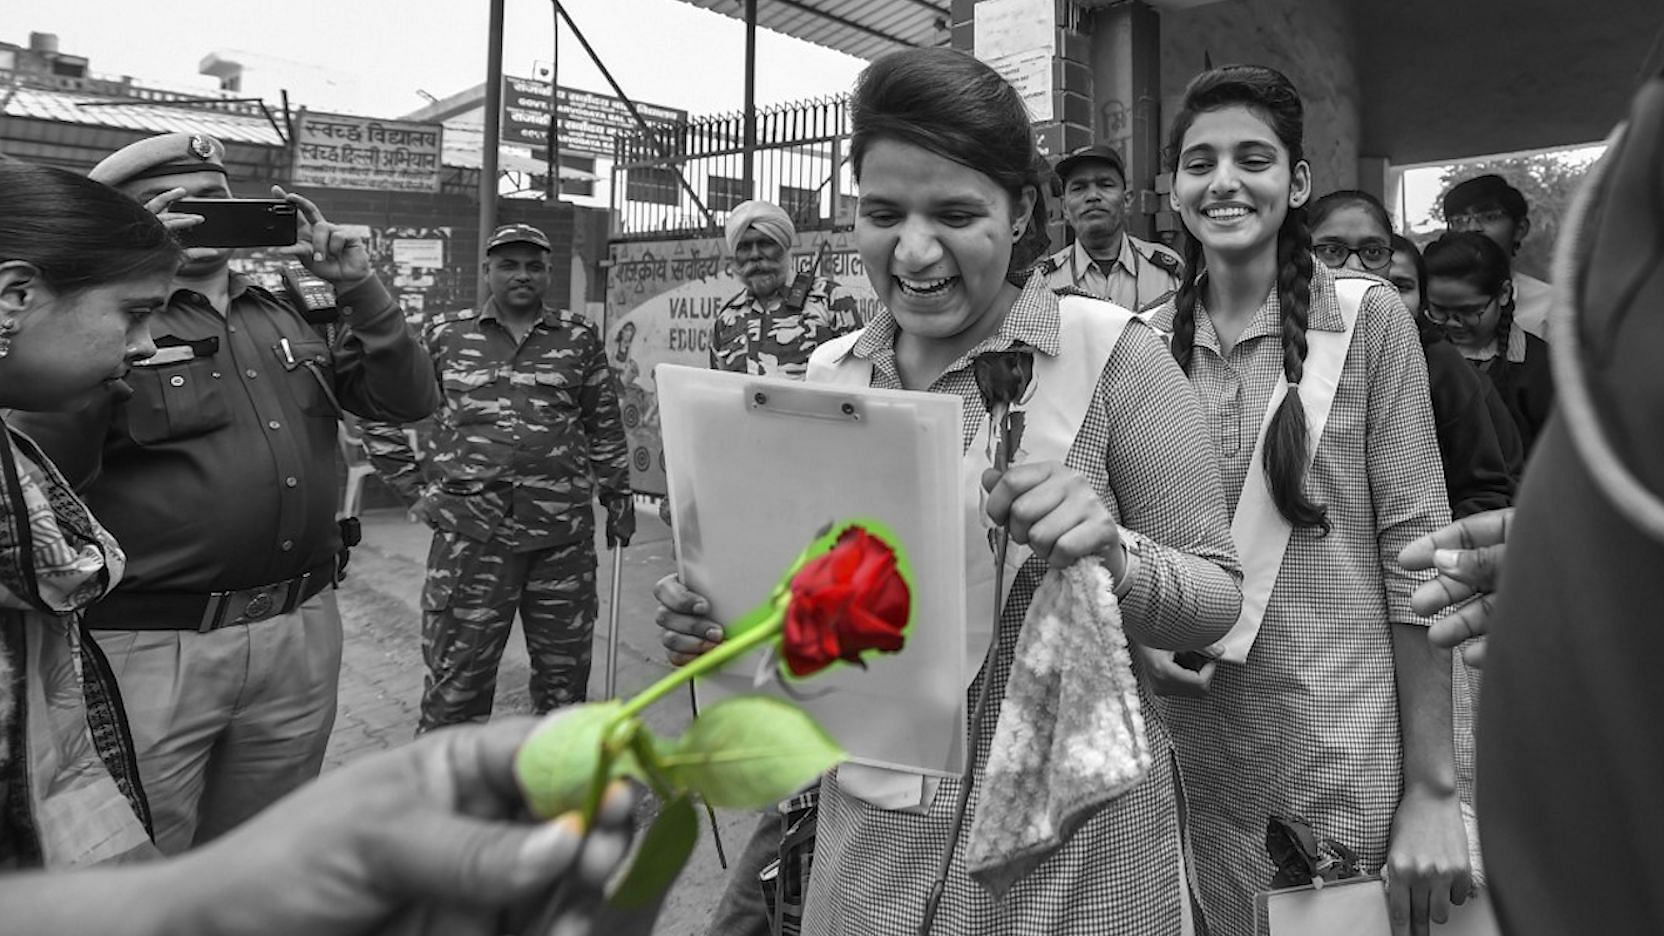 Delhi police offering roses to students.